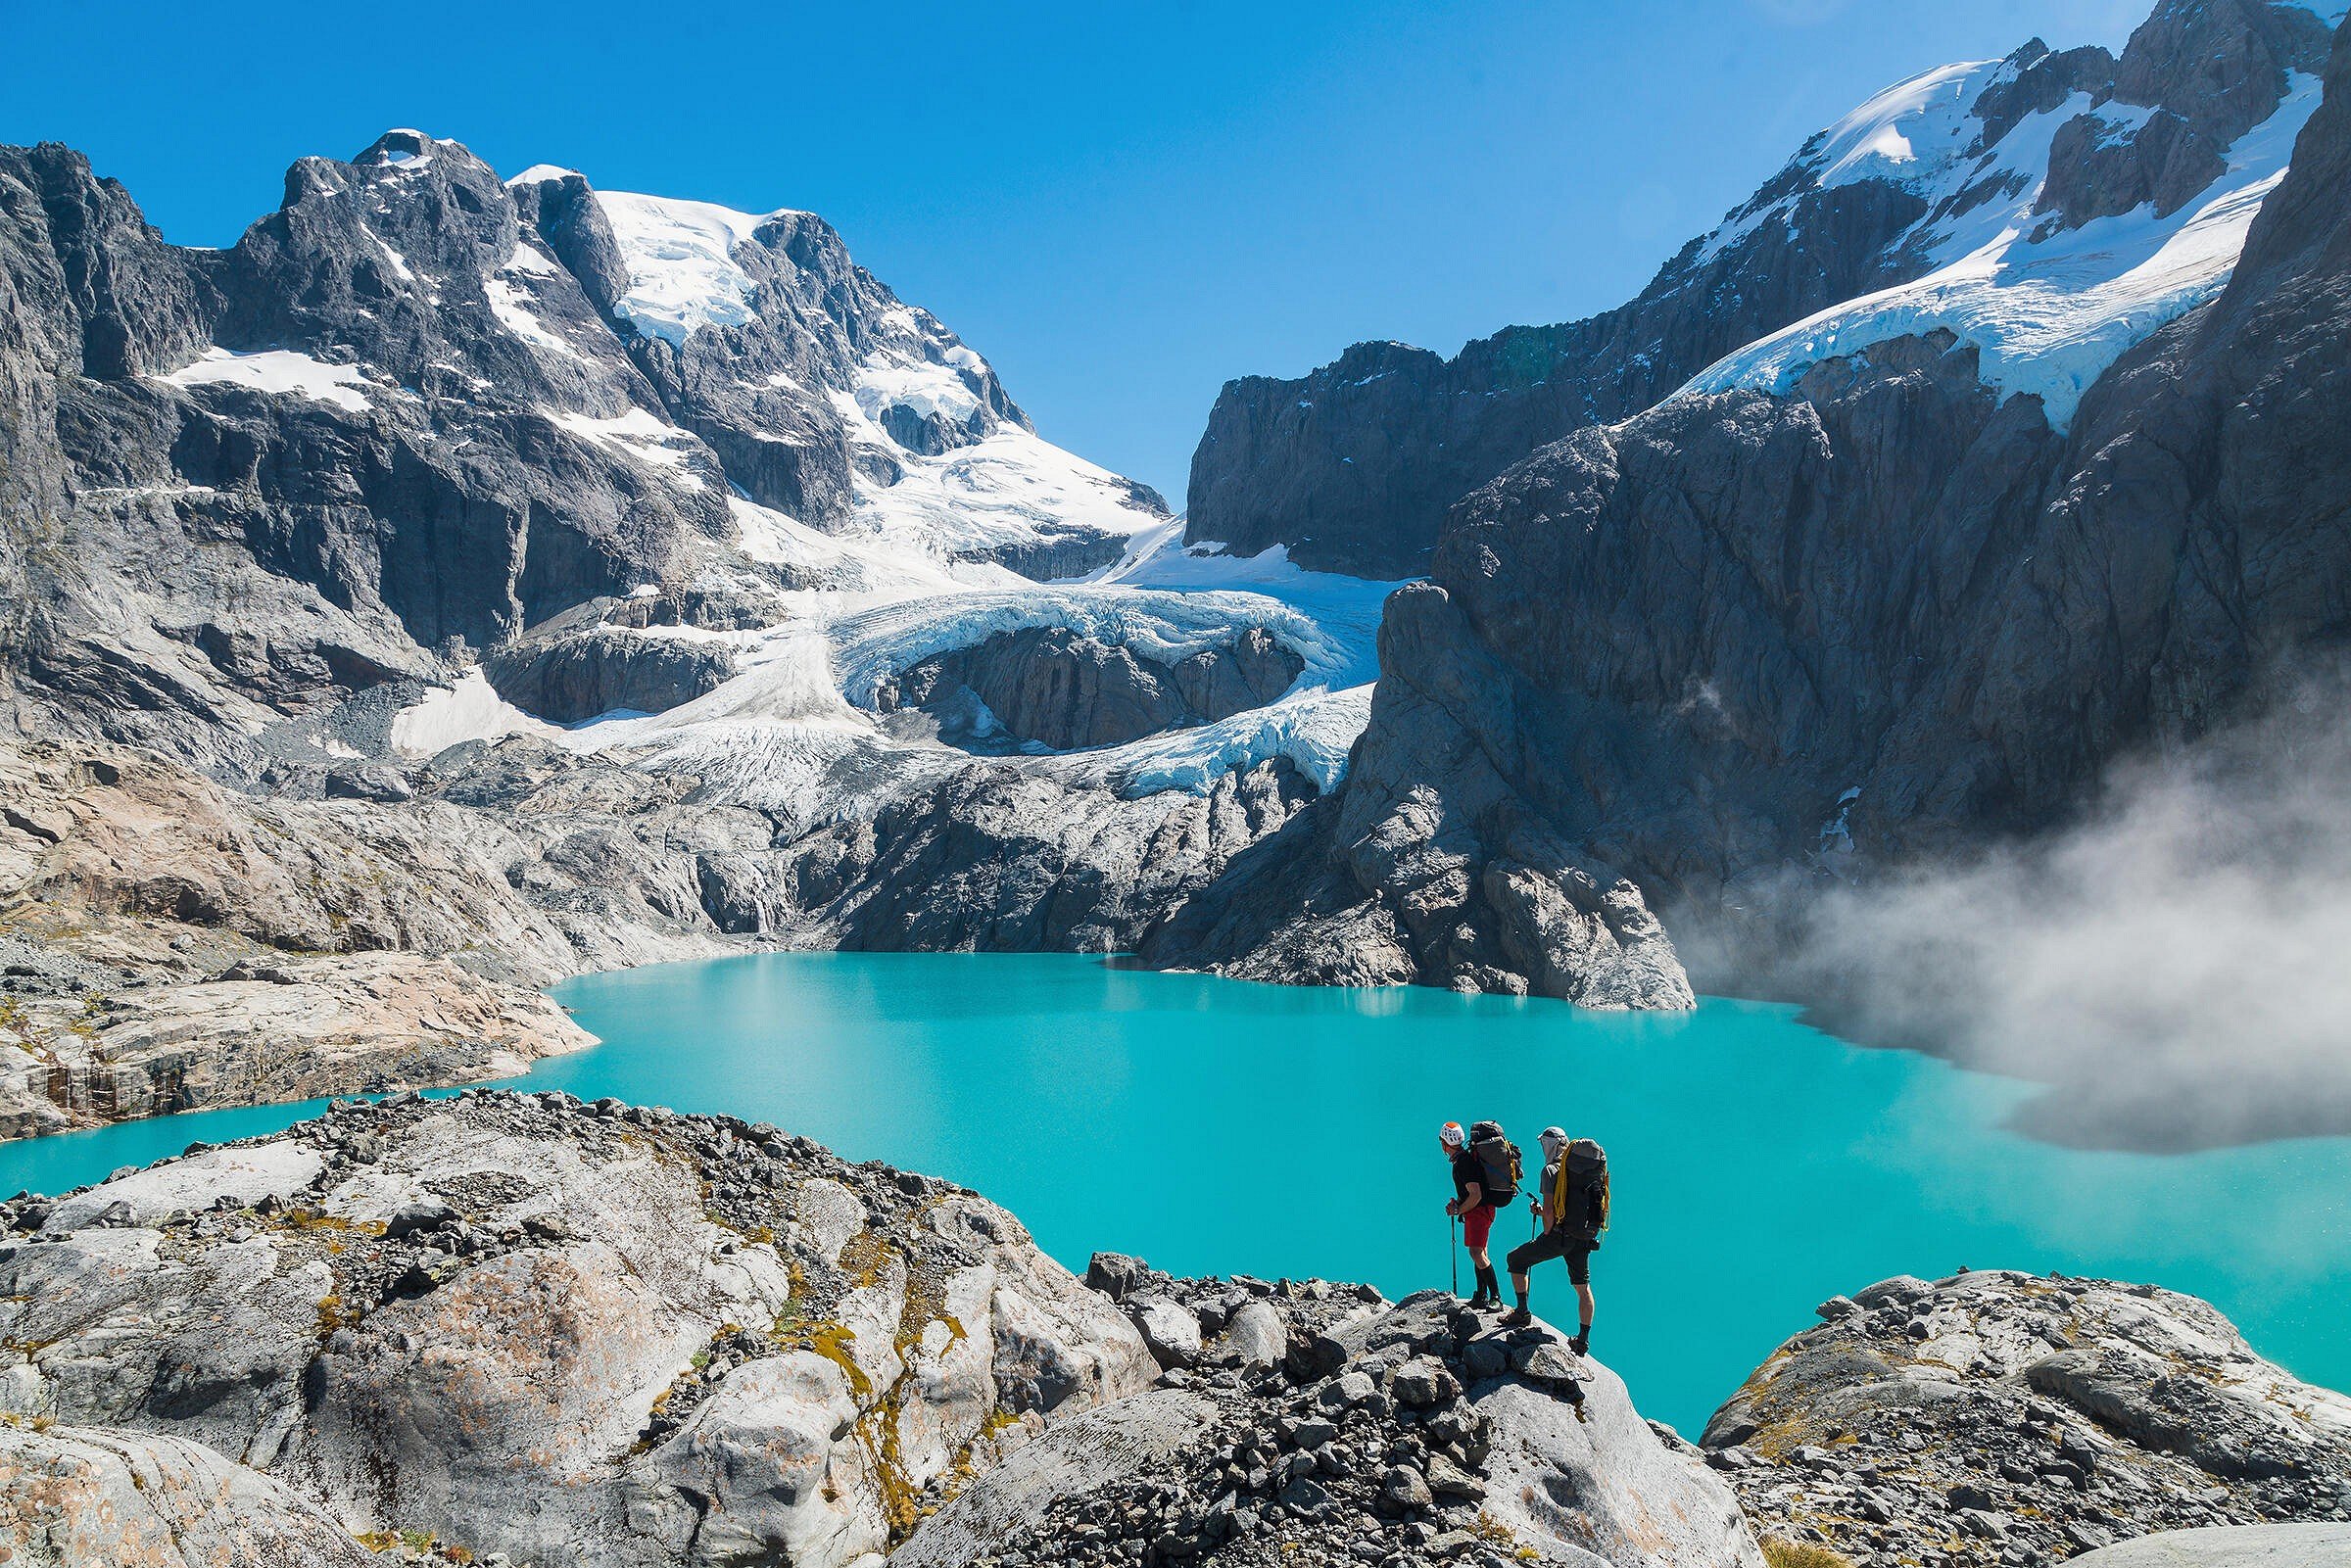 Donne Glacier Lake and Mount Tutoko, at the head of Glacier Creek, central Darran Mountains, New Zealand  © highluxphoto